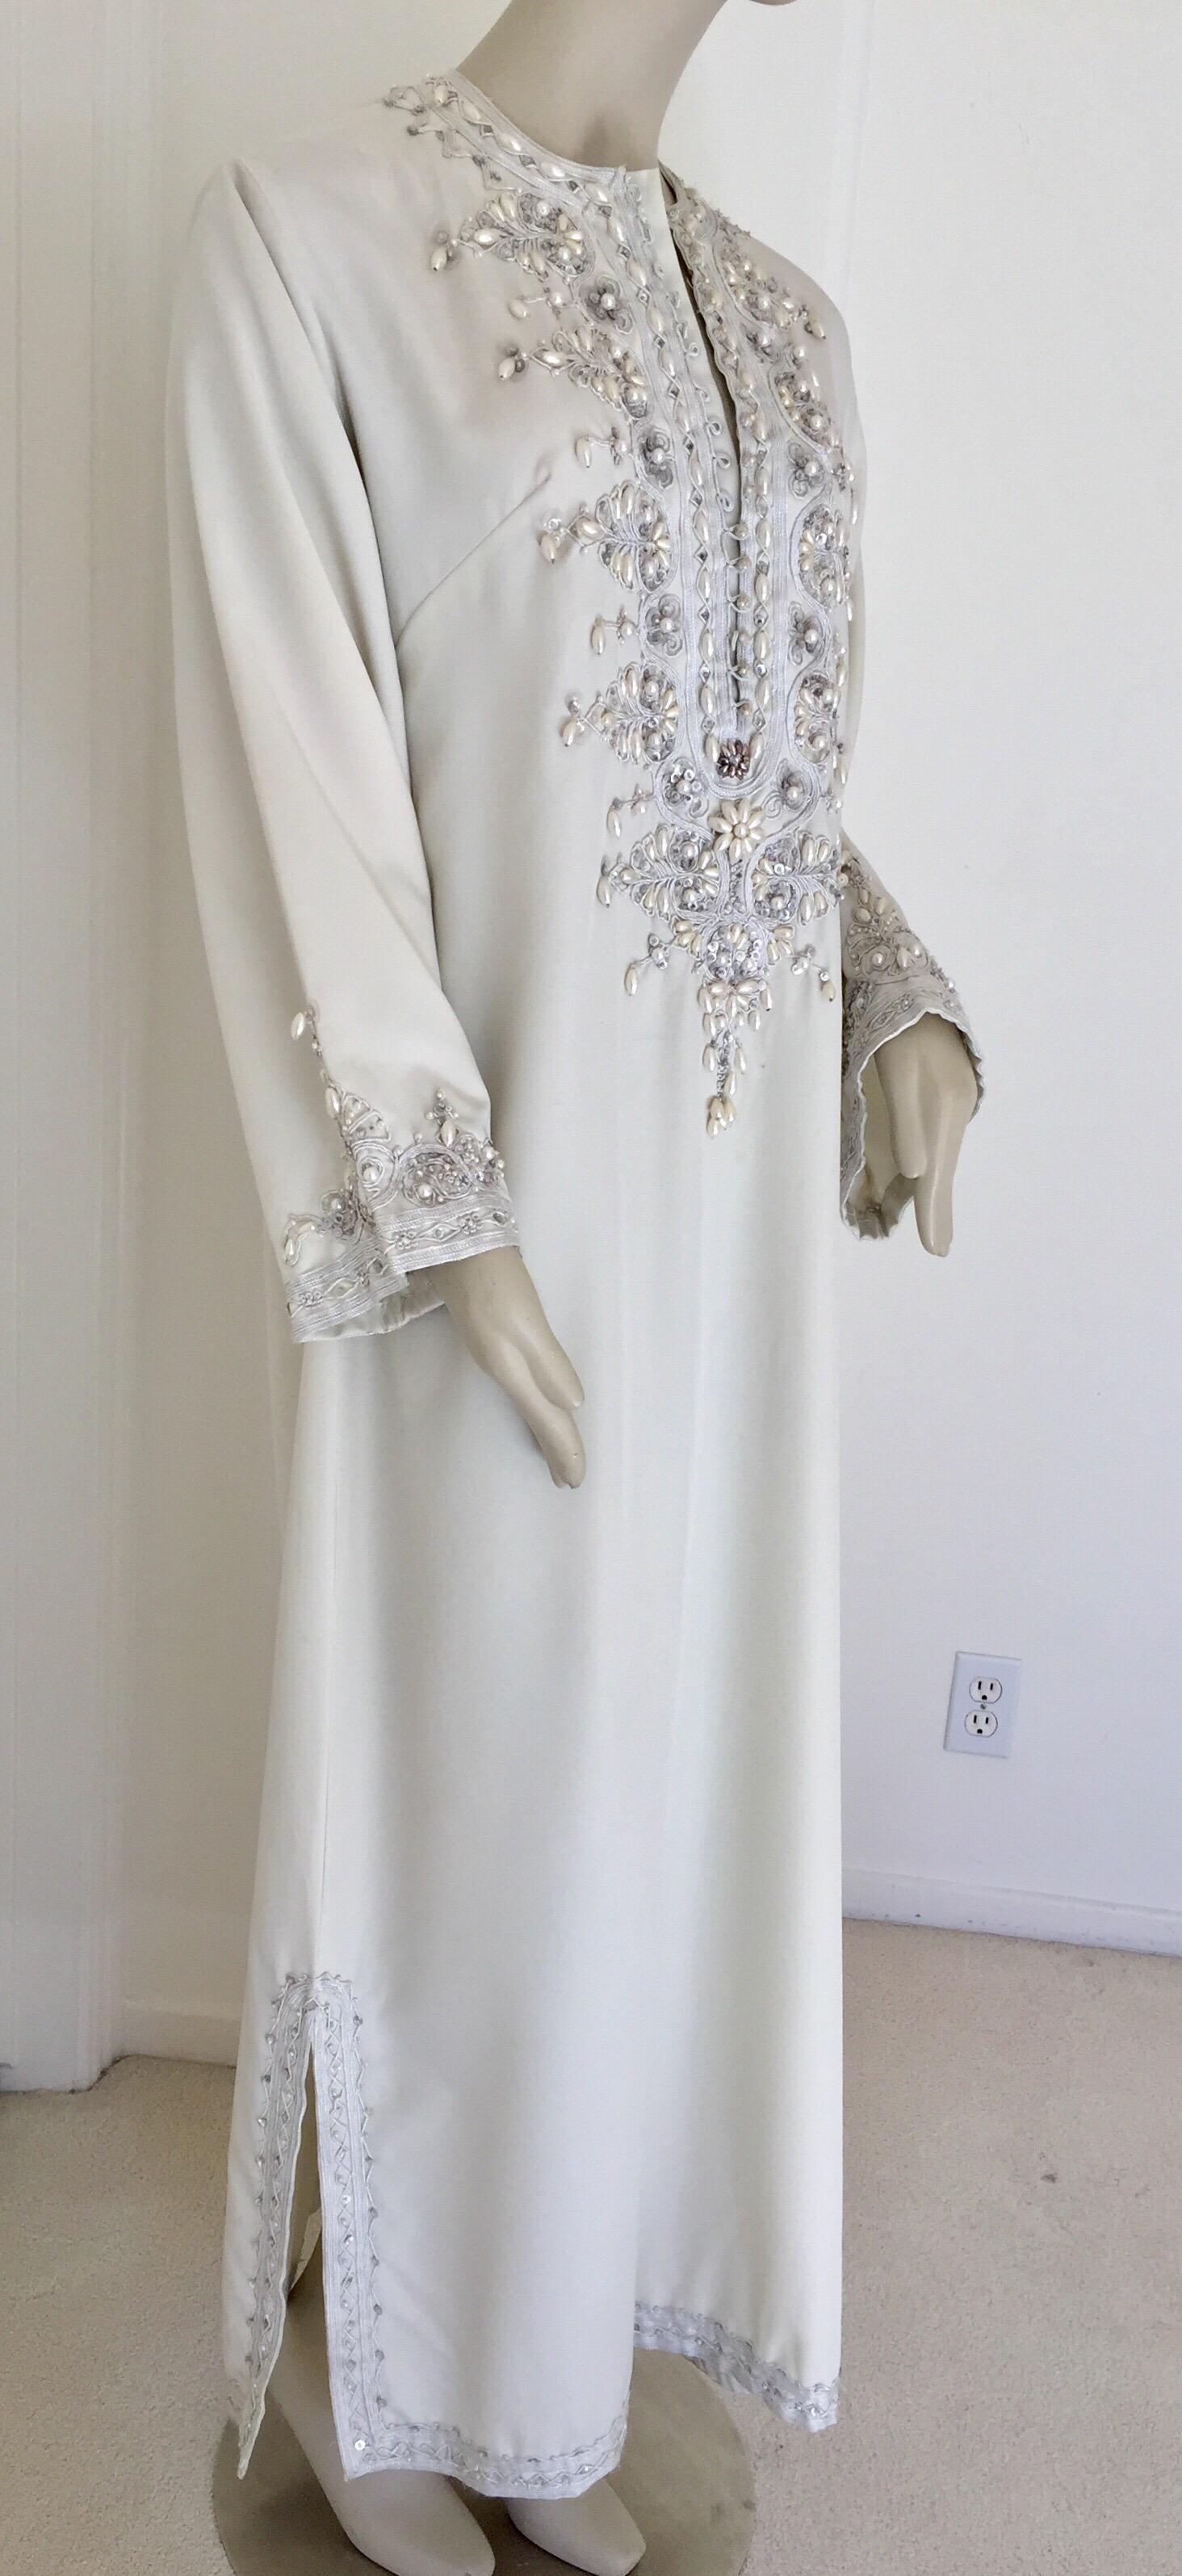 Moroccan caftan, evening or interior adorned with white pearls.
Handcrafted vintage exotic 1970s kaftan gown.
The luminous white poly jersey maxi dress caftan is adorned in front with metallic floral embroidered patterned and white pearls and silver